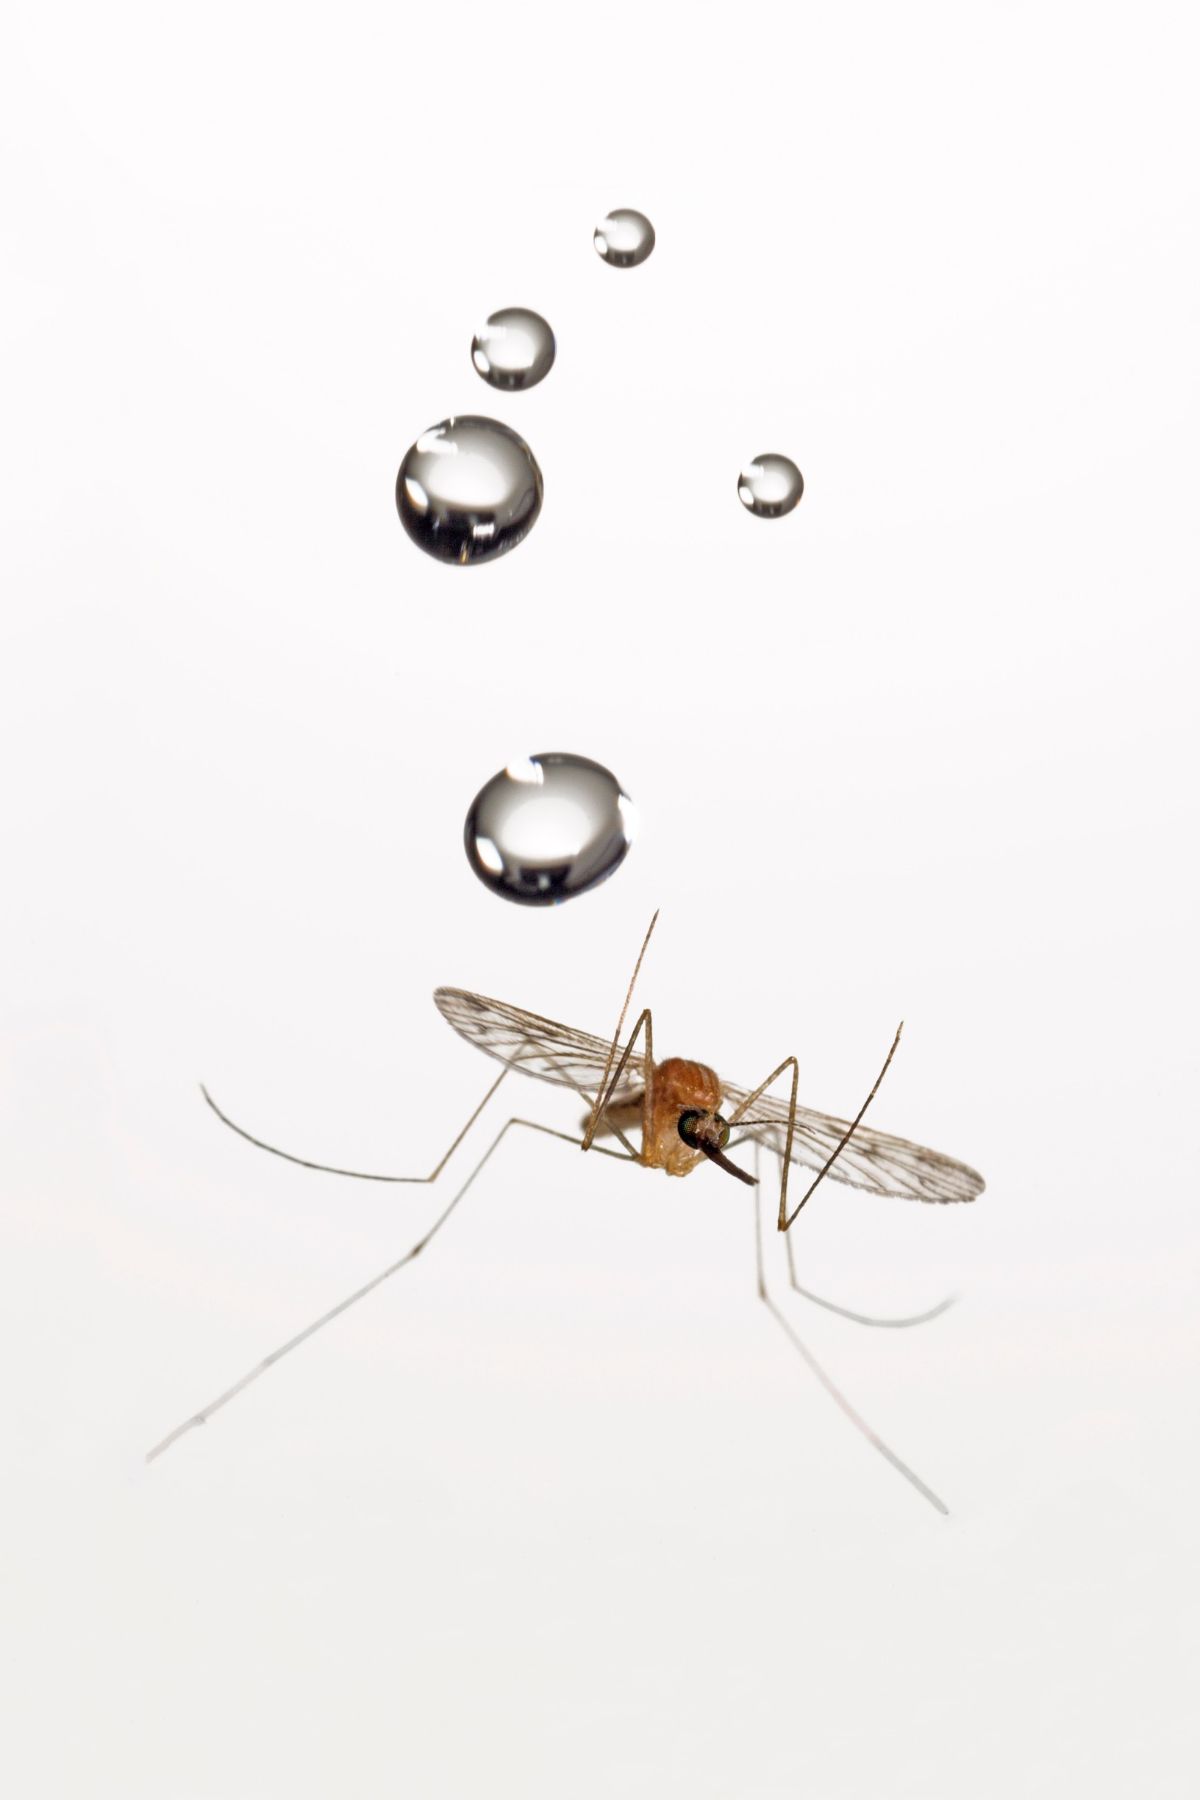 a mosquito flies underneath very large raindrops